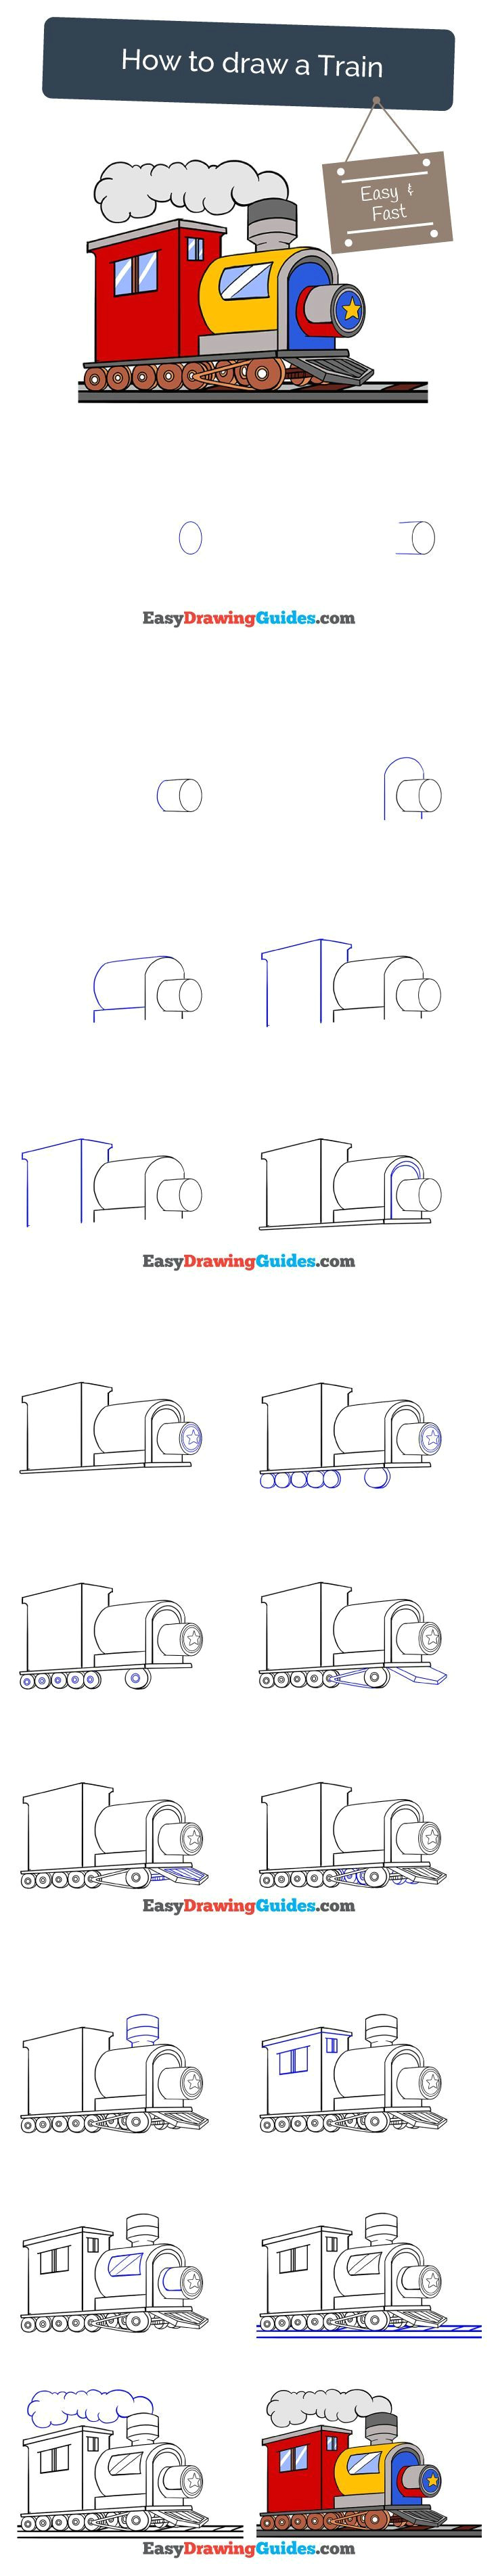 Drawing Easy Train How to Draw A Train In A Few Easy Steps How to Draw Man Made